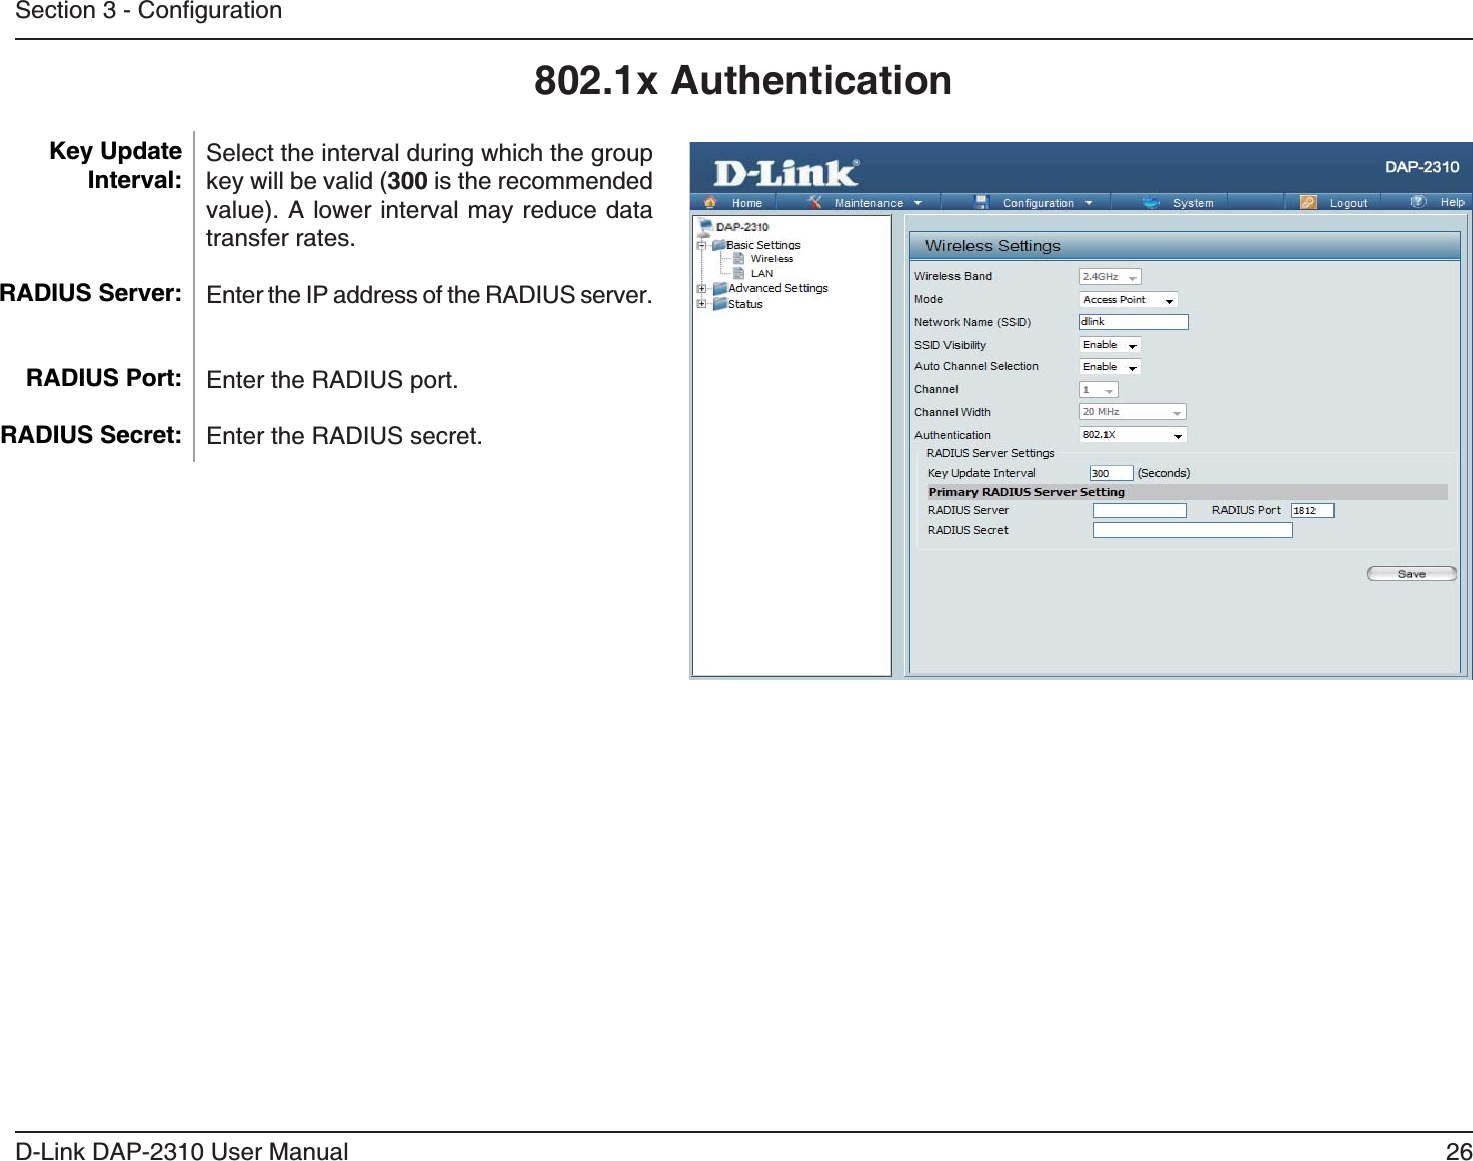 26D-Link DAP-2310 User Manual802.1x AuthenticationSelect the interval during which the group 300 is the recommended value). A lower interval may reduce data transfer rates.Enter the IP address of the RADIUS server.Enter the RADIUS port.Enter the RADIUS secret.Key Update Interval: RADIUS Server:RADIUS Port:RADIUS Secret: